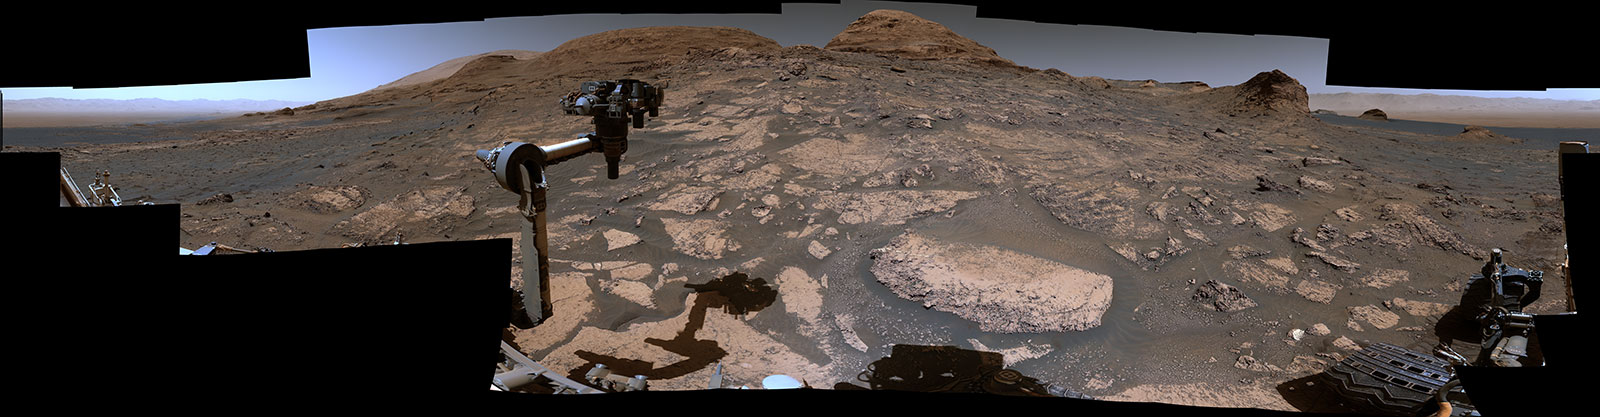 NASA's Curiosity rover video shows a fresh panoramic view of Mars